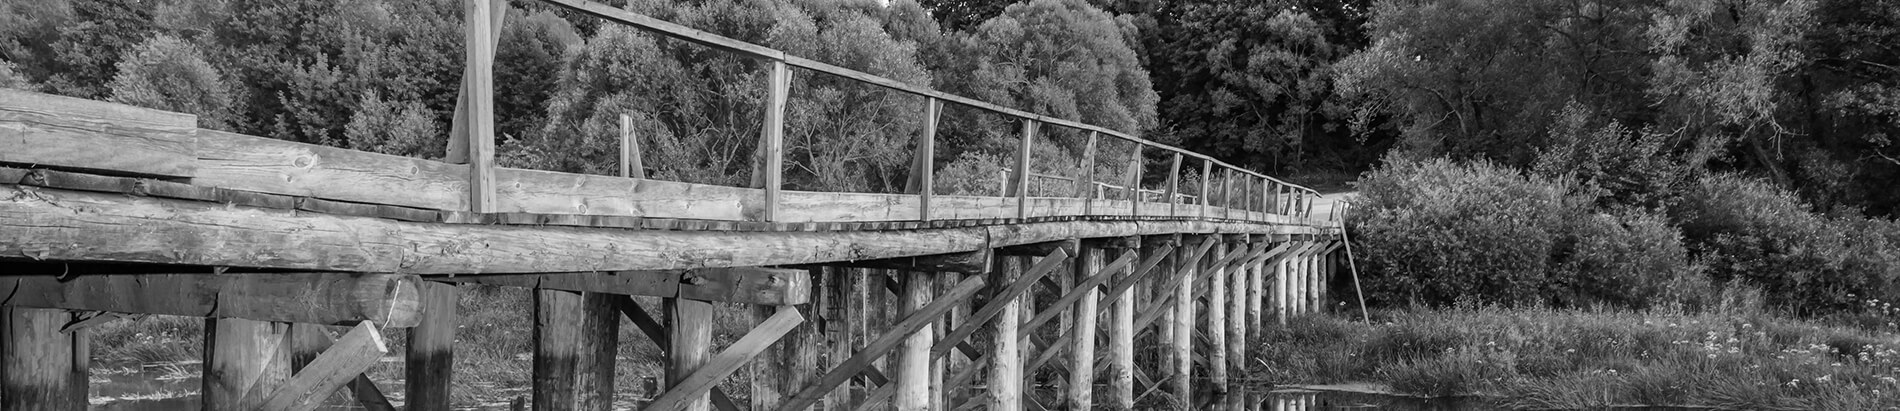 grayscale wooden bridge in nature over a river with tress in background